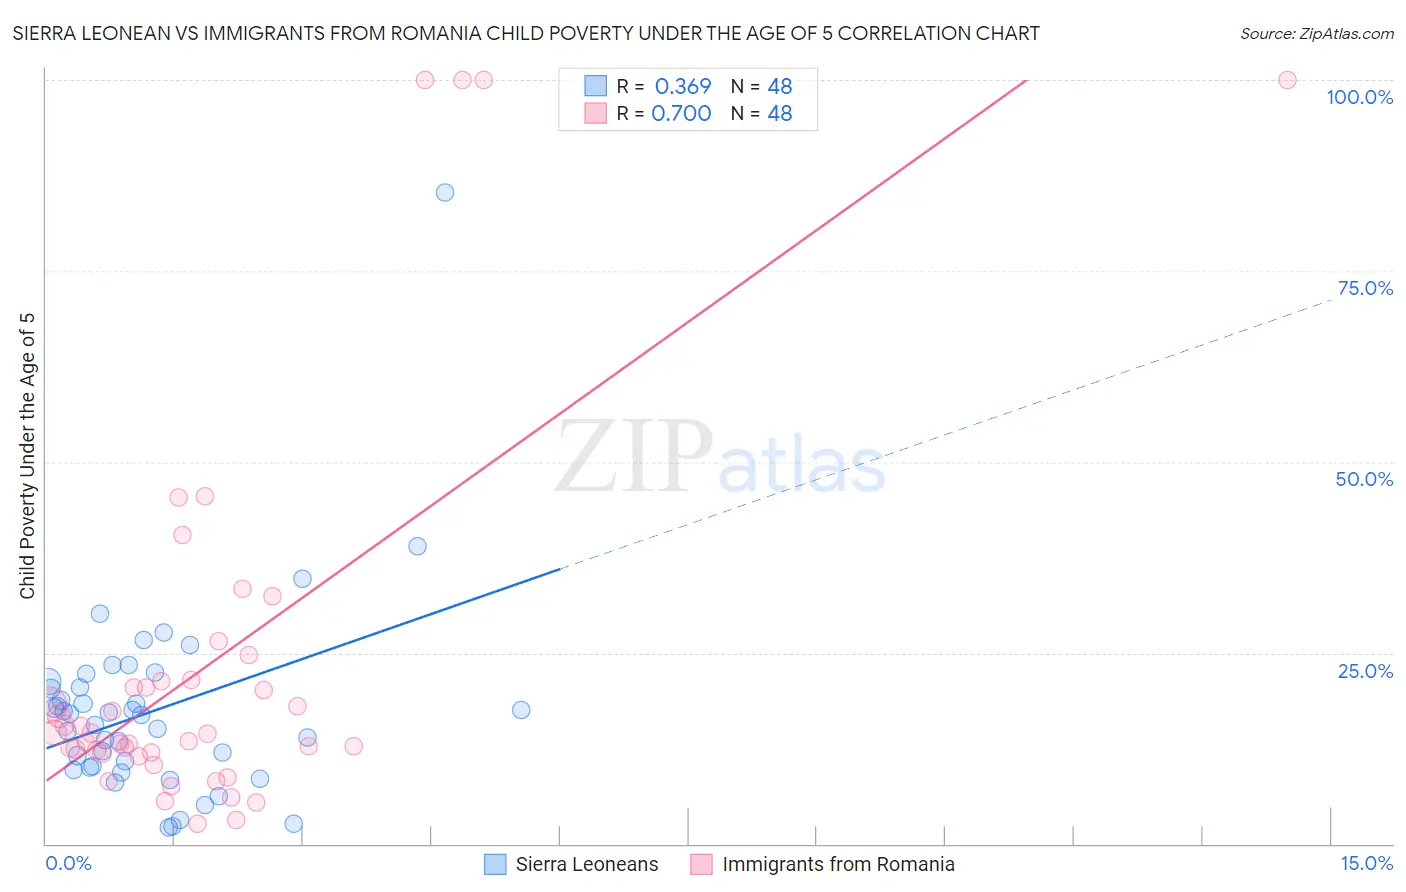 Sierra Leonean vs Immigrants from Romania Child Poverty Under the Age of 5